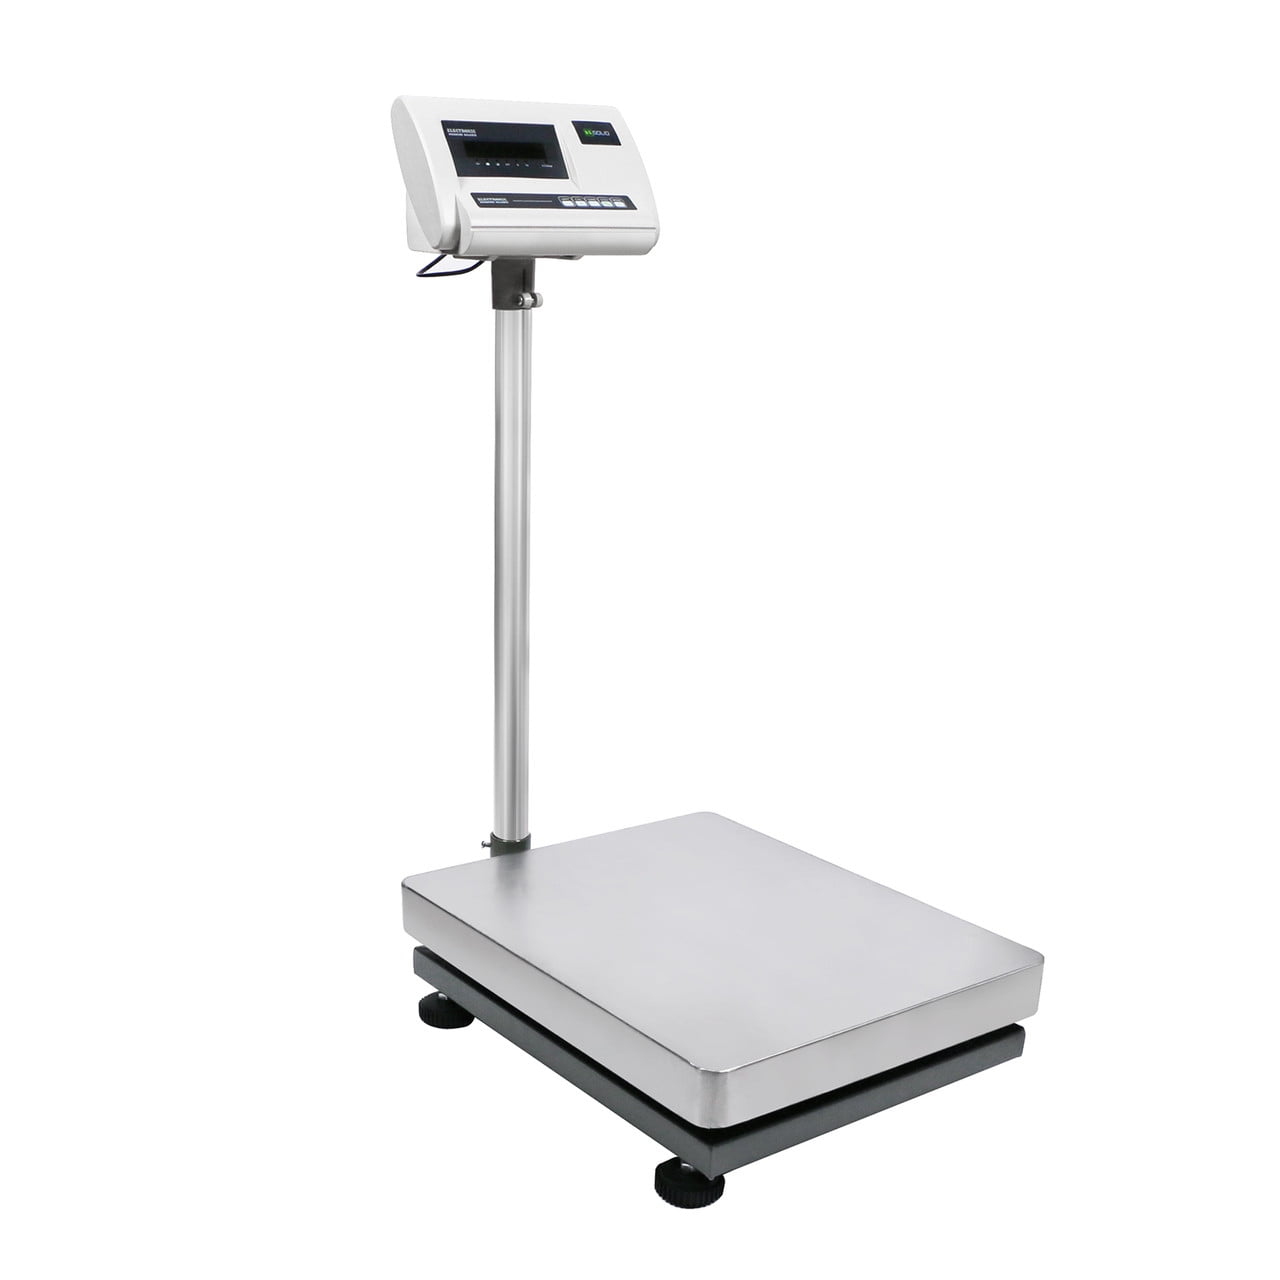 Global Industrial NTEP Mobile Bench Scale w/ Backrail, LED Display, 1,000 lb x 0.2 lb 412666